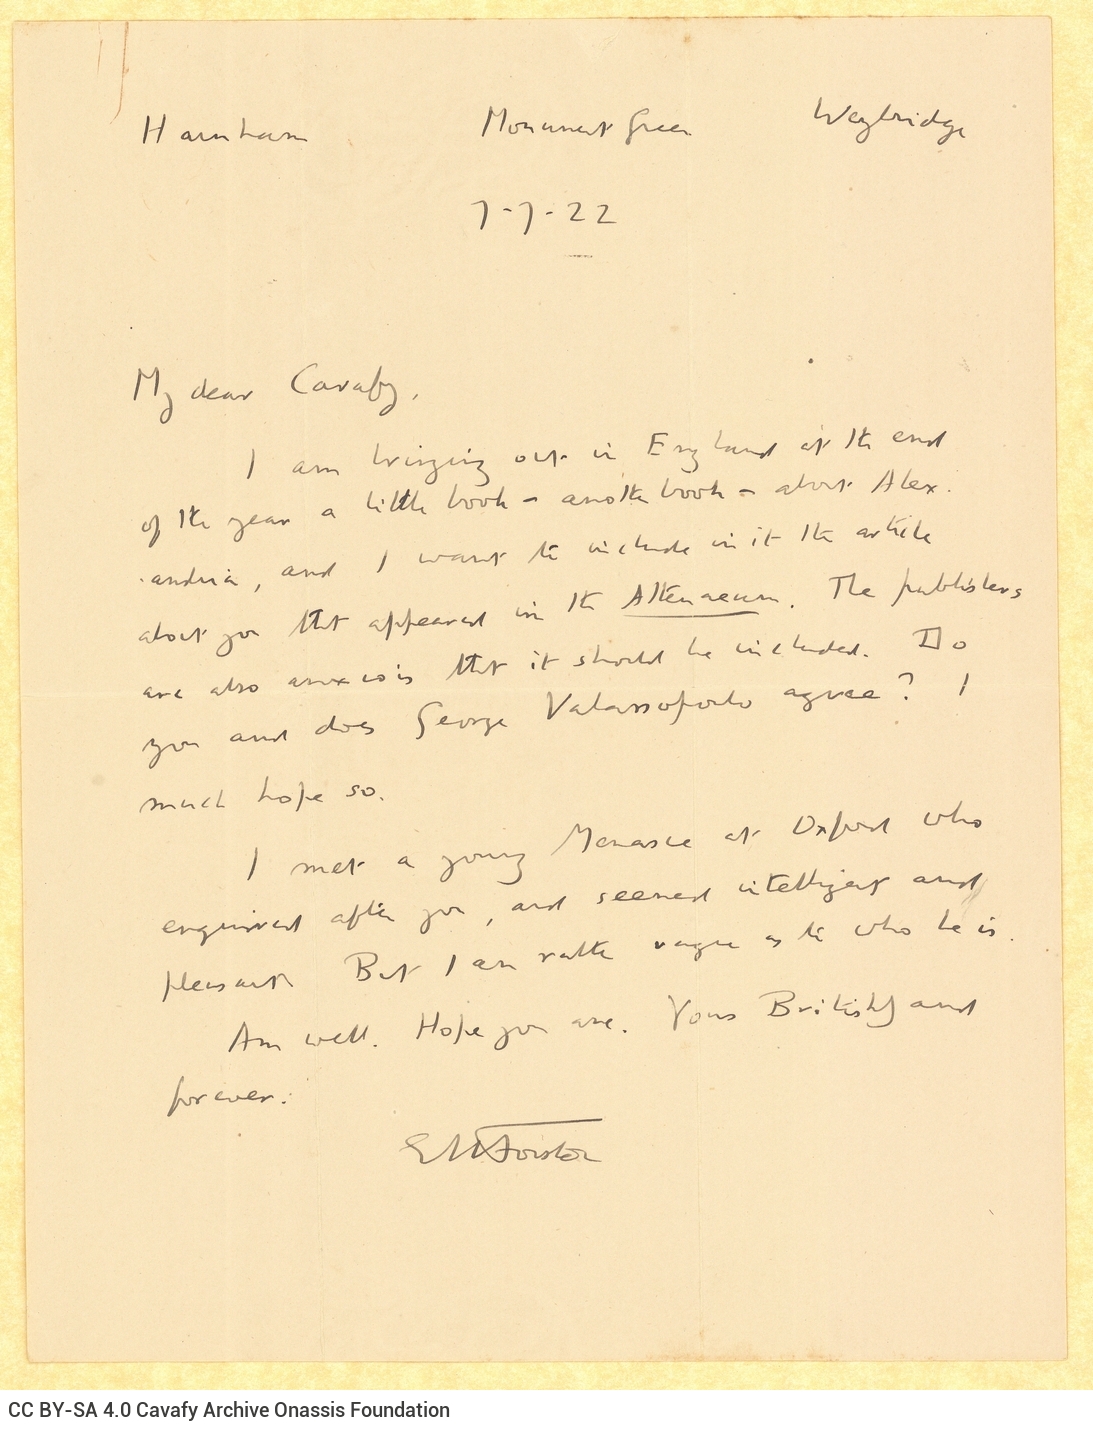 Handwritten letter by E. M. Forster to Cavafy on one side of a sheet. He informs the poet that he wishes to include the artic